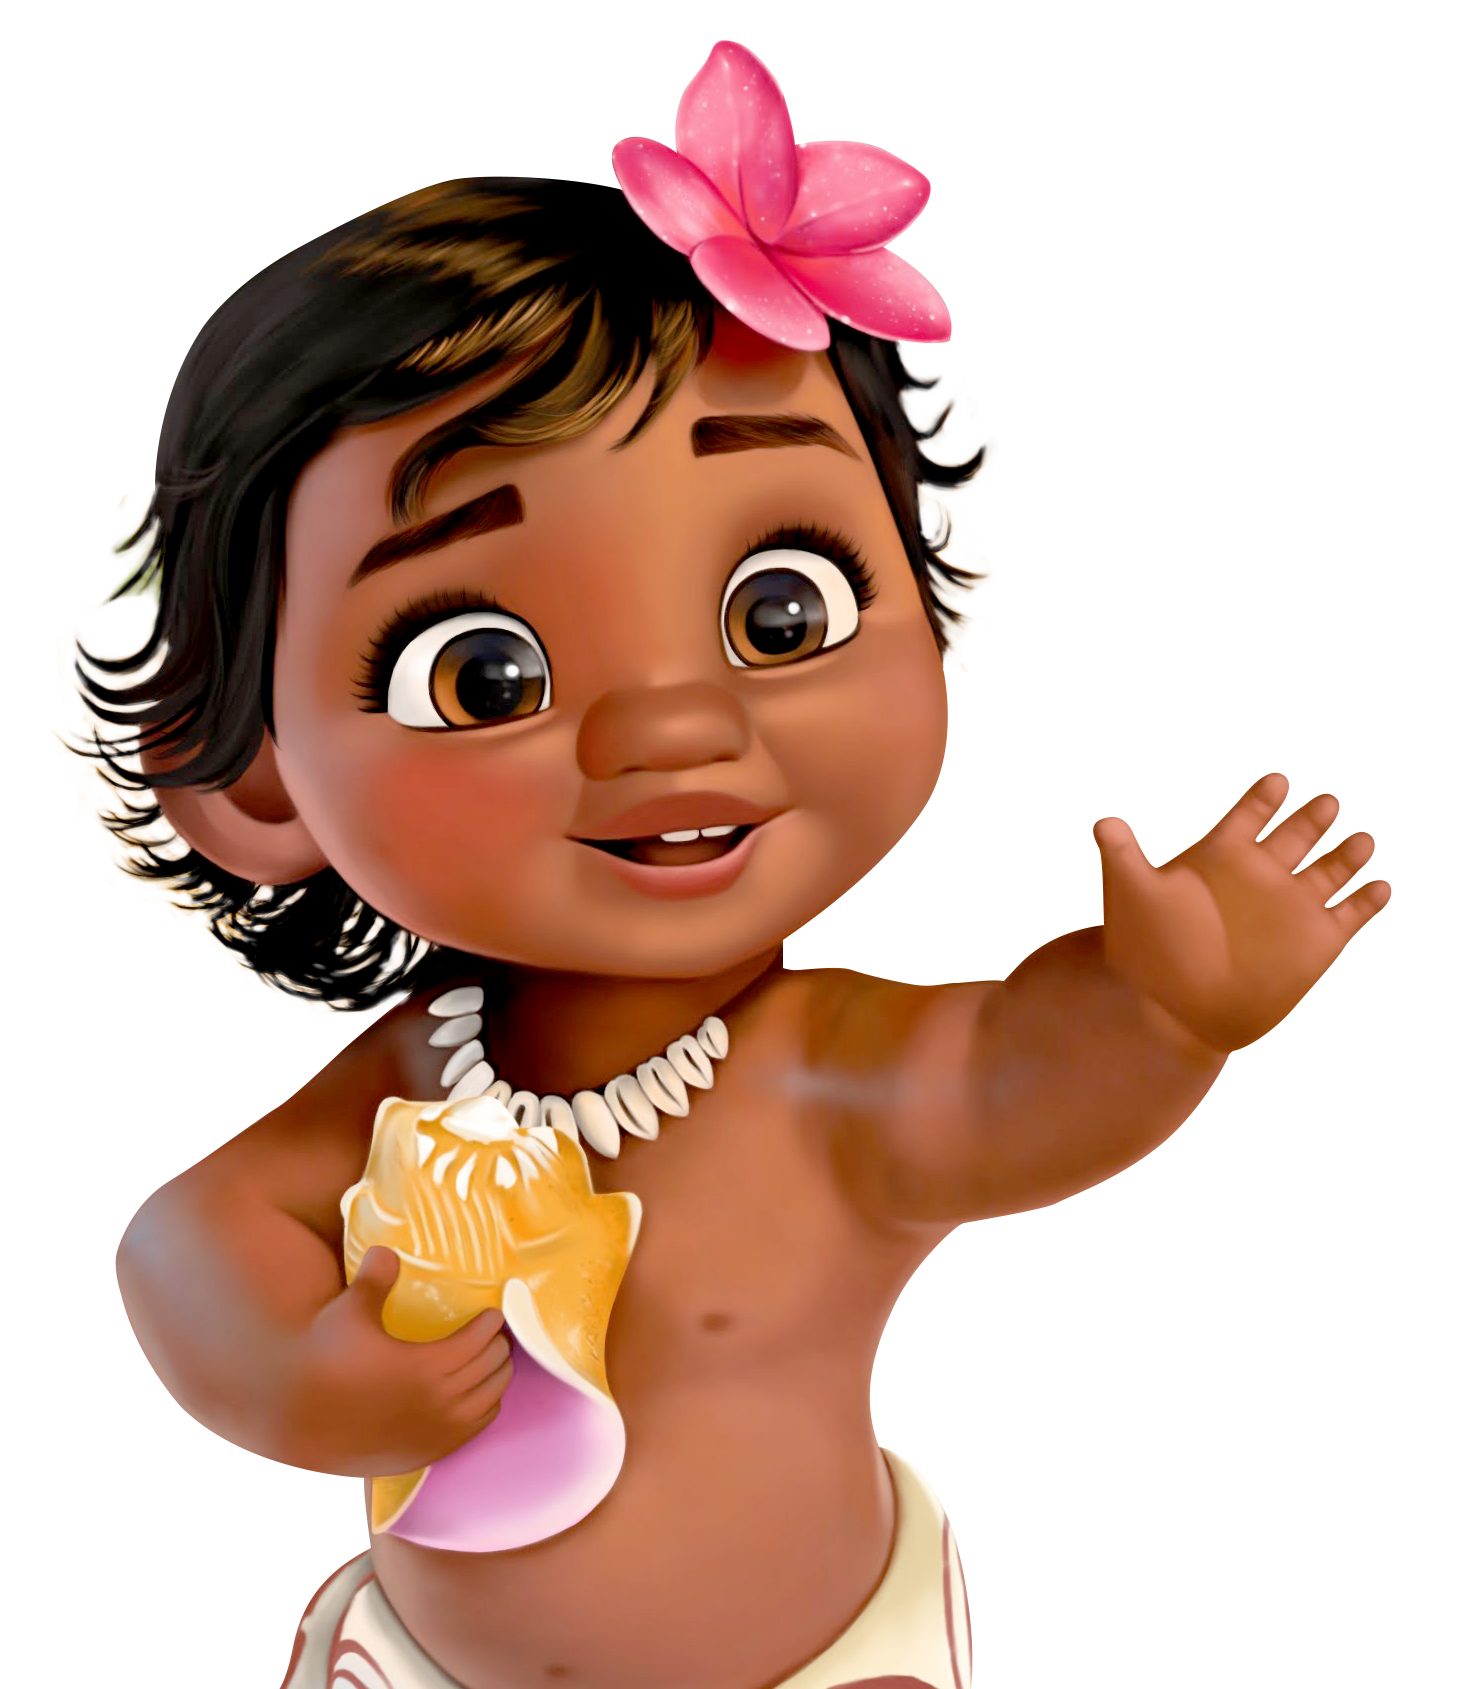 Disney clipart moana, Disney moana Transparent FREE for download on WebStockReview 2021